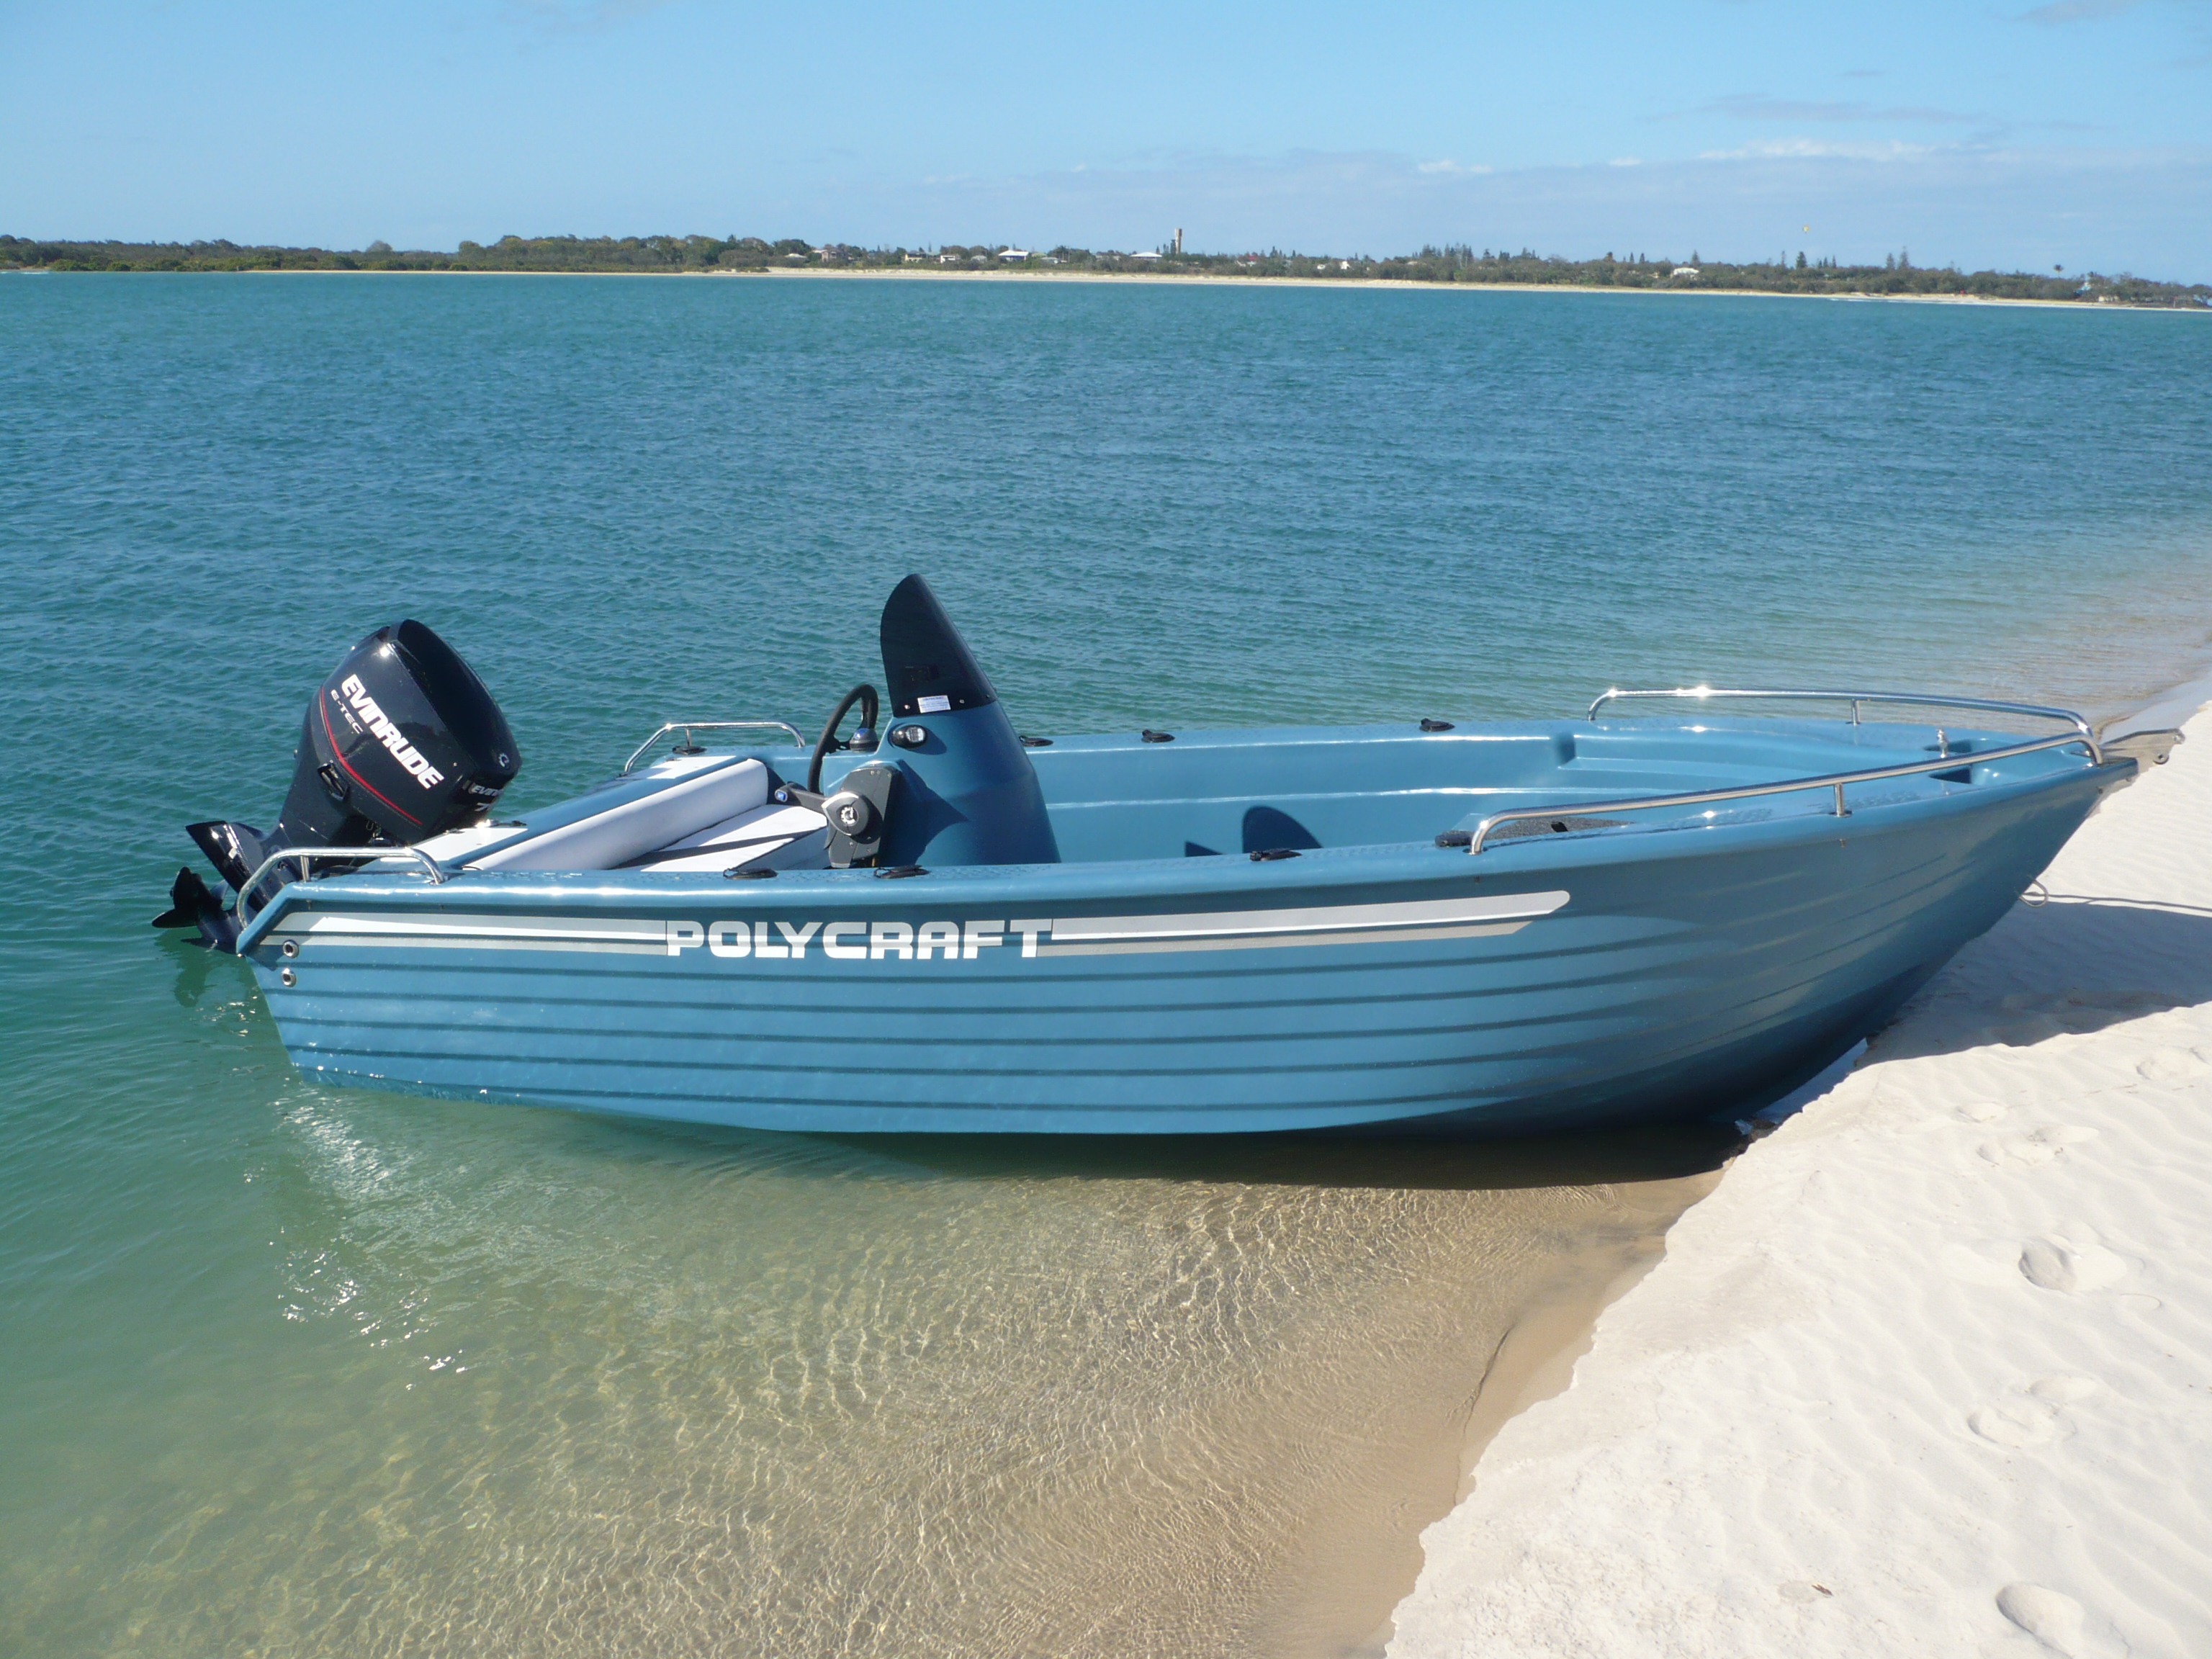 Polycraft 480 Brumby, New Boats for Sale